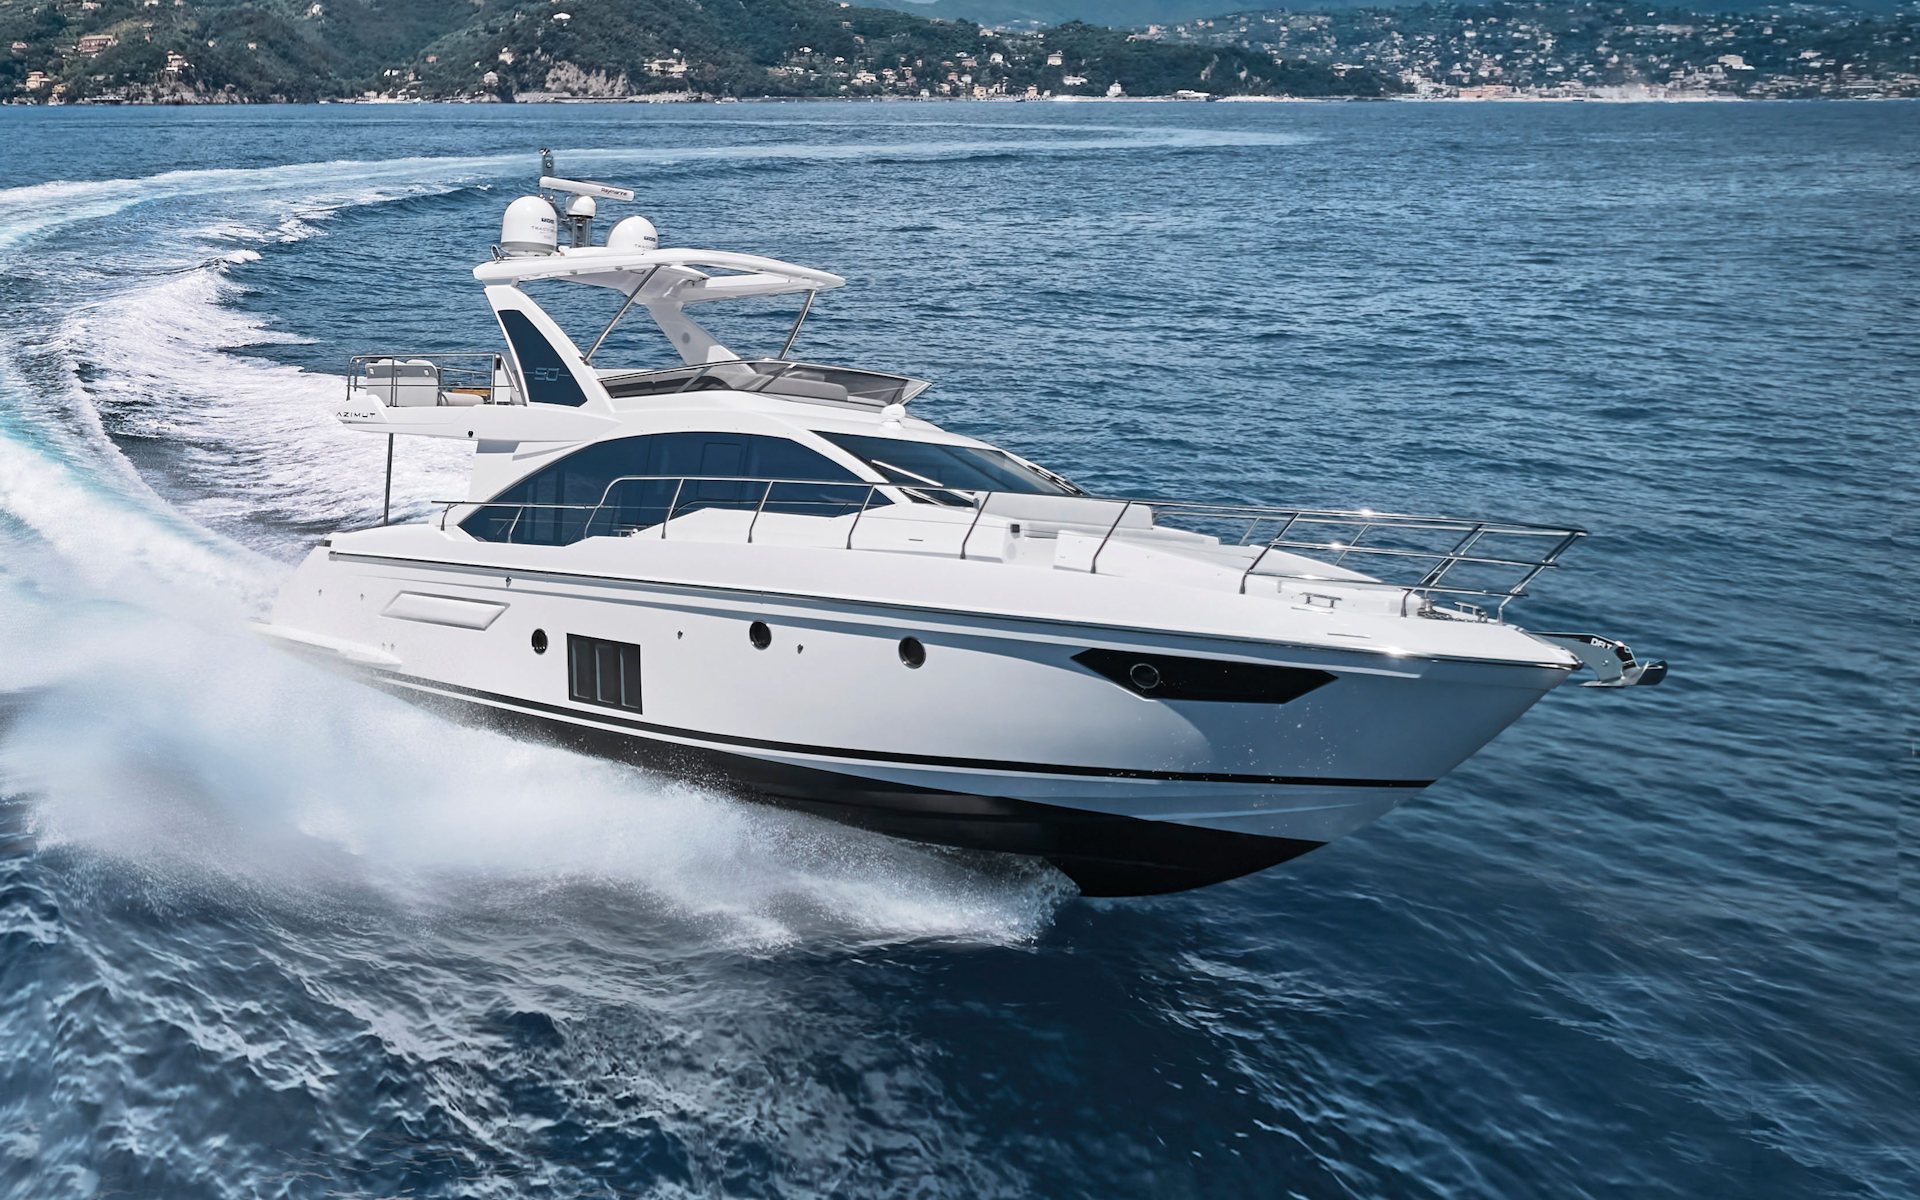 360 VR Virtual Tours of the Azimut Fly 50